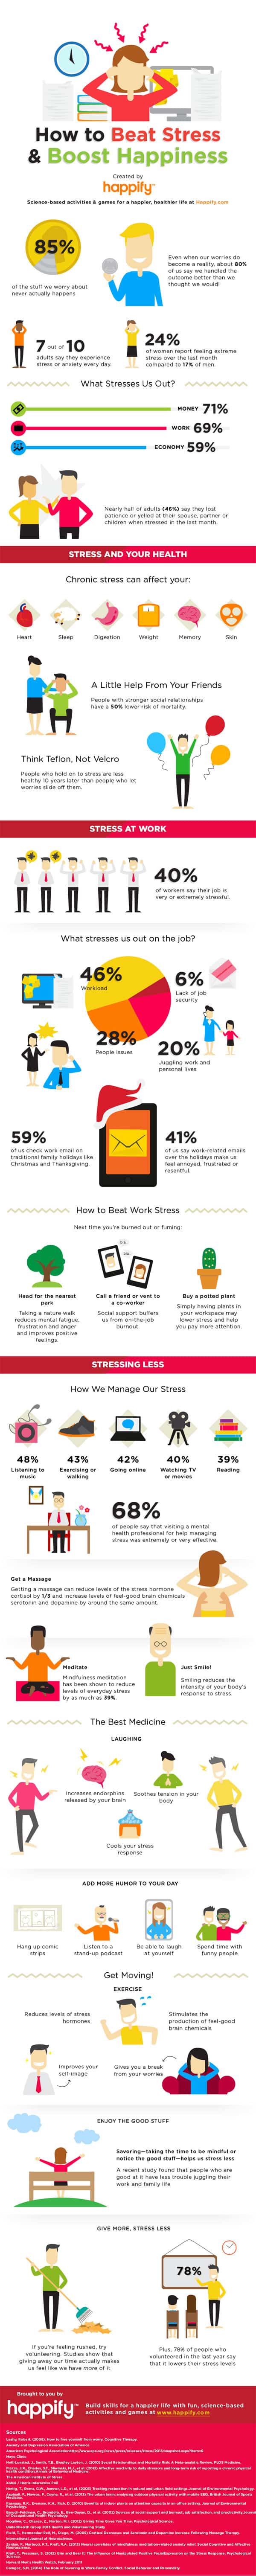 How-to-stress-less-and-find-happiness-infographic